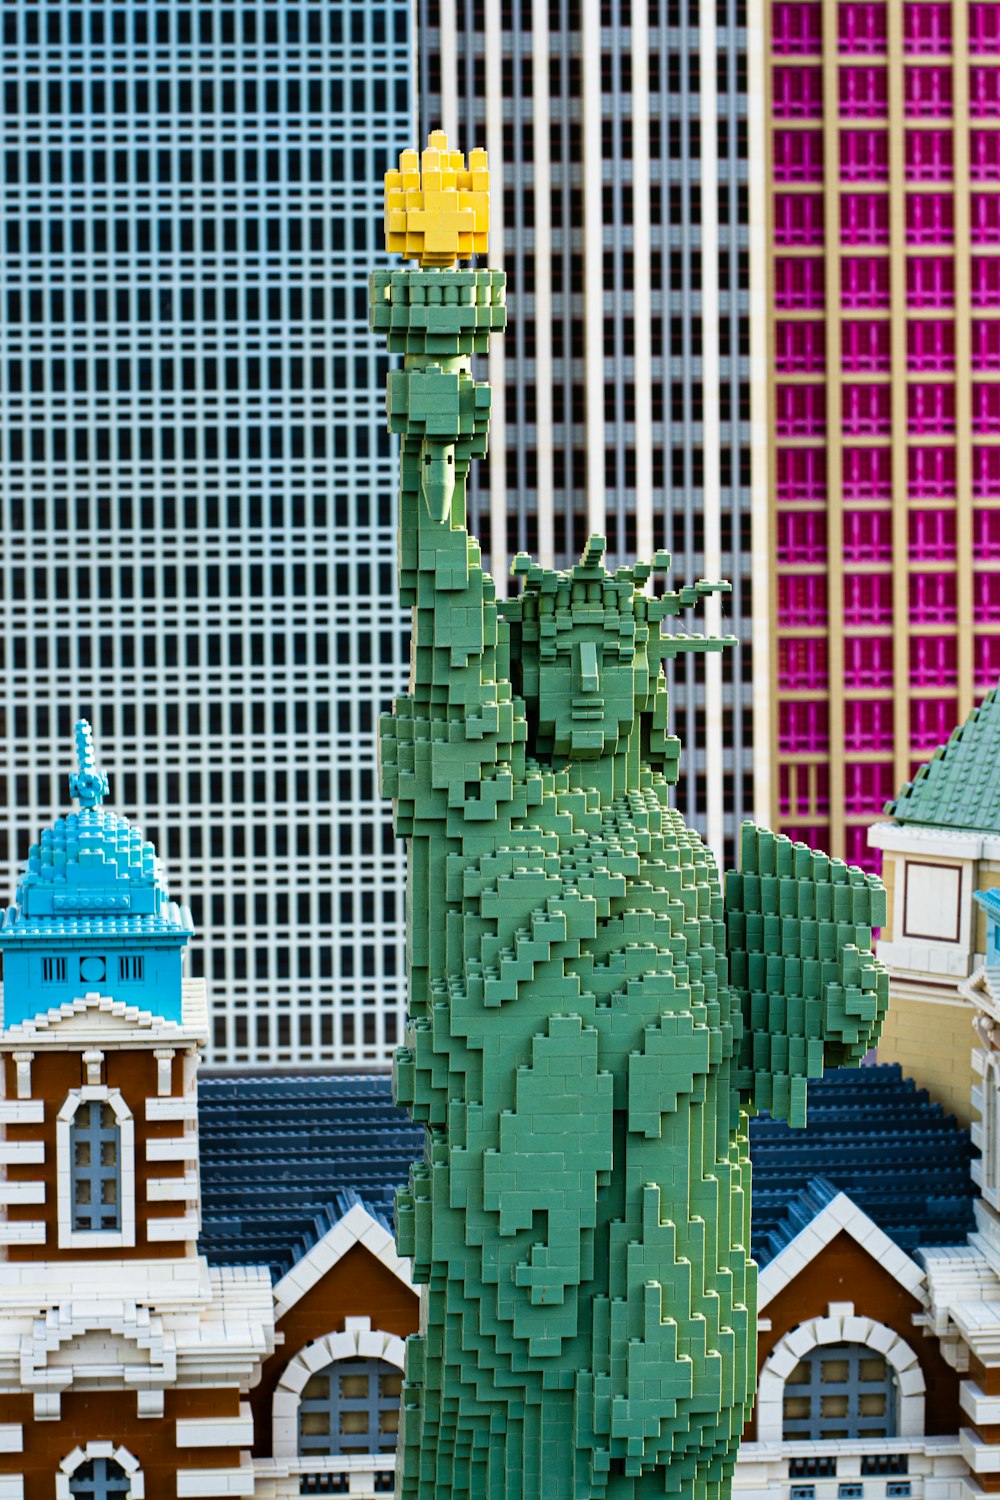 a statue of liberty made out of legos